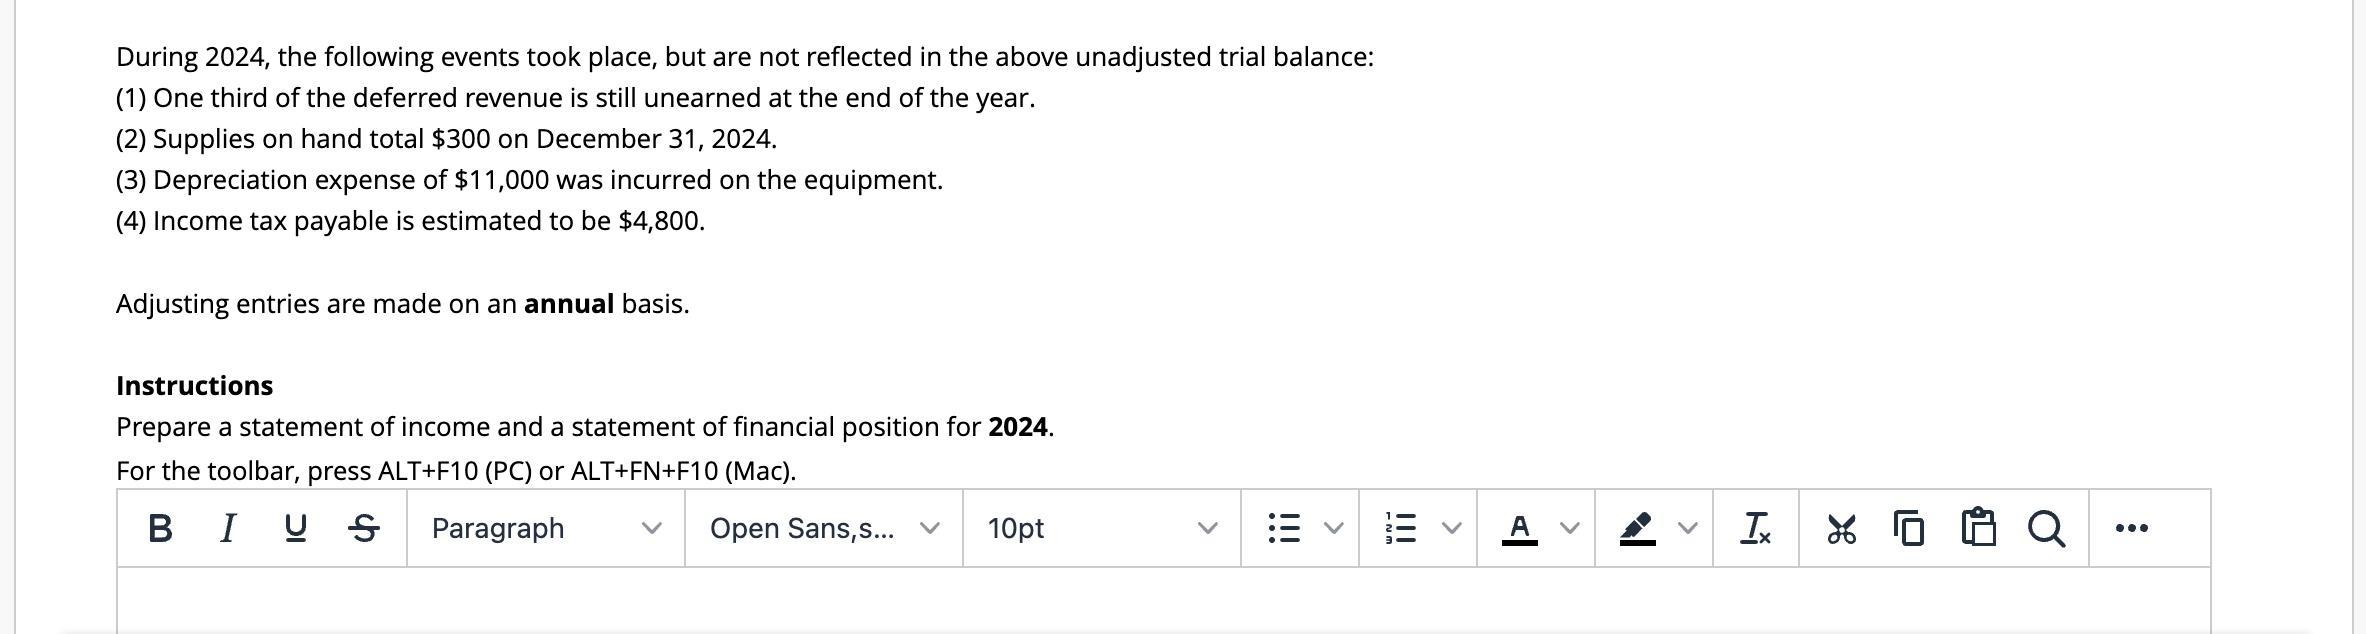 During 2024, the following events took place, but are not reflected in the above unadjusted trial balance: (1) One third of t